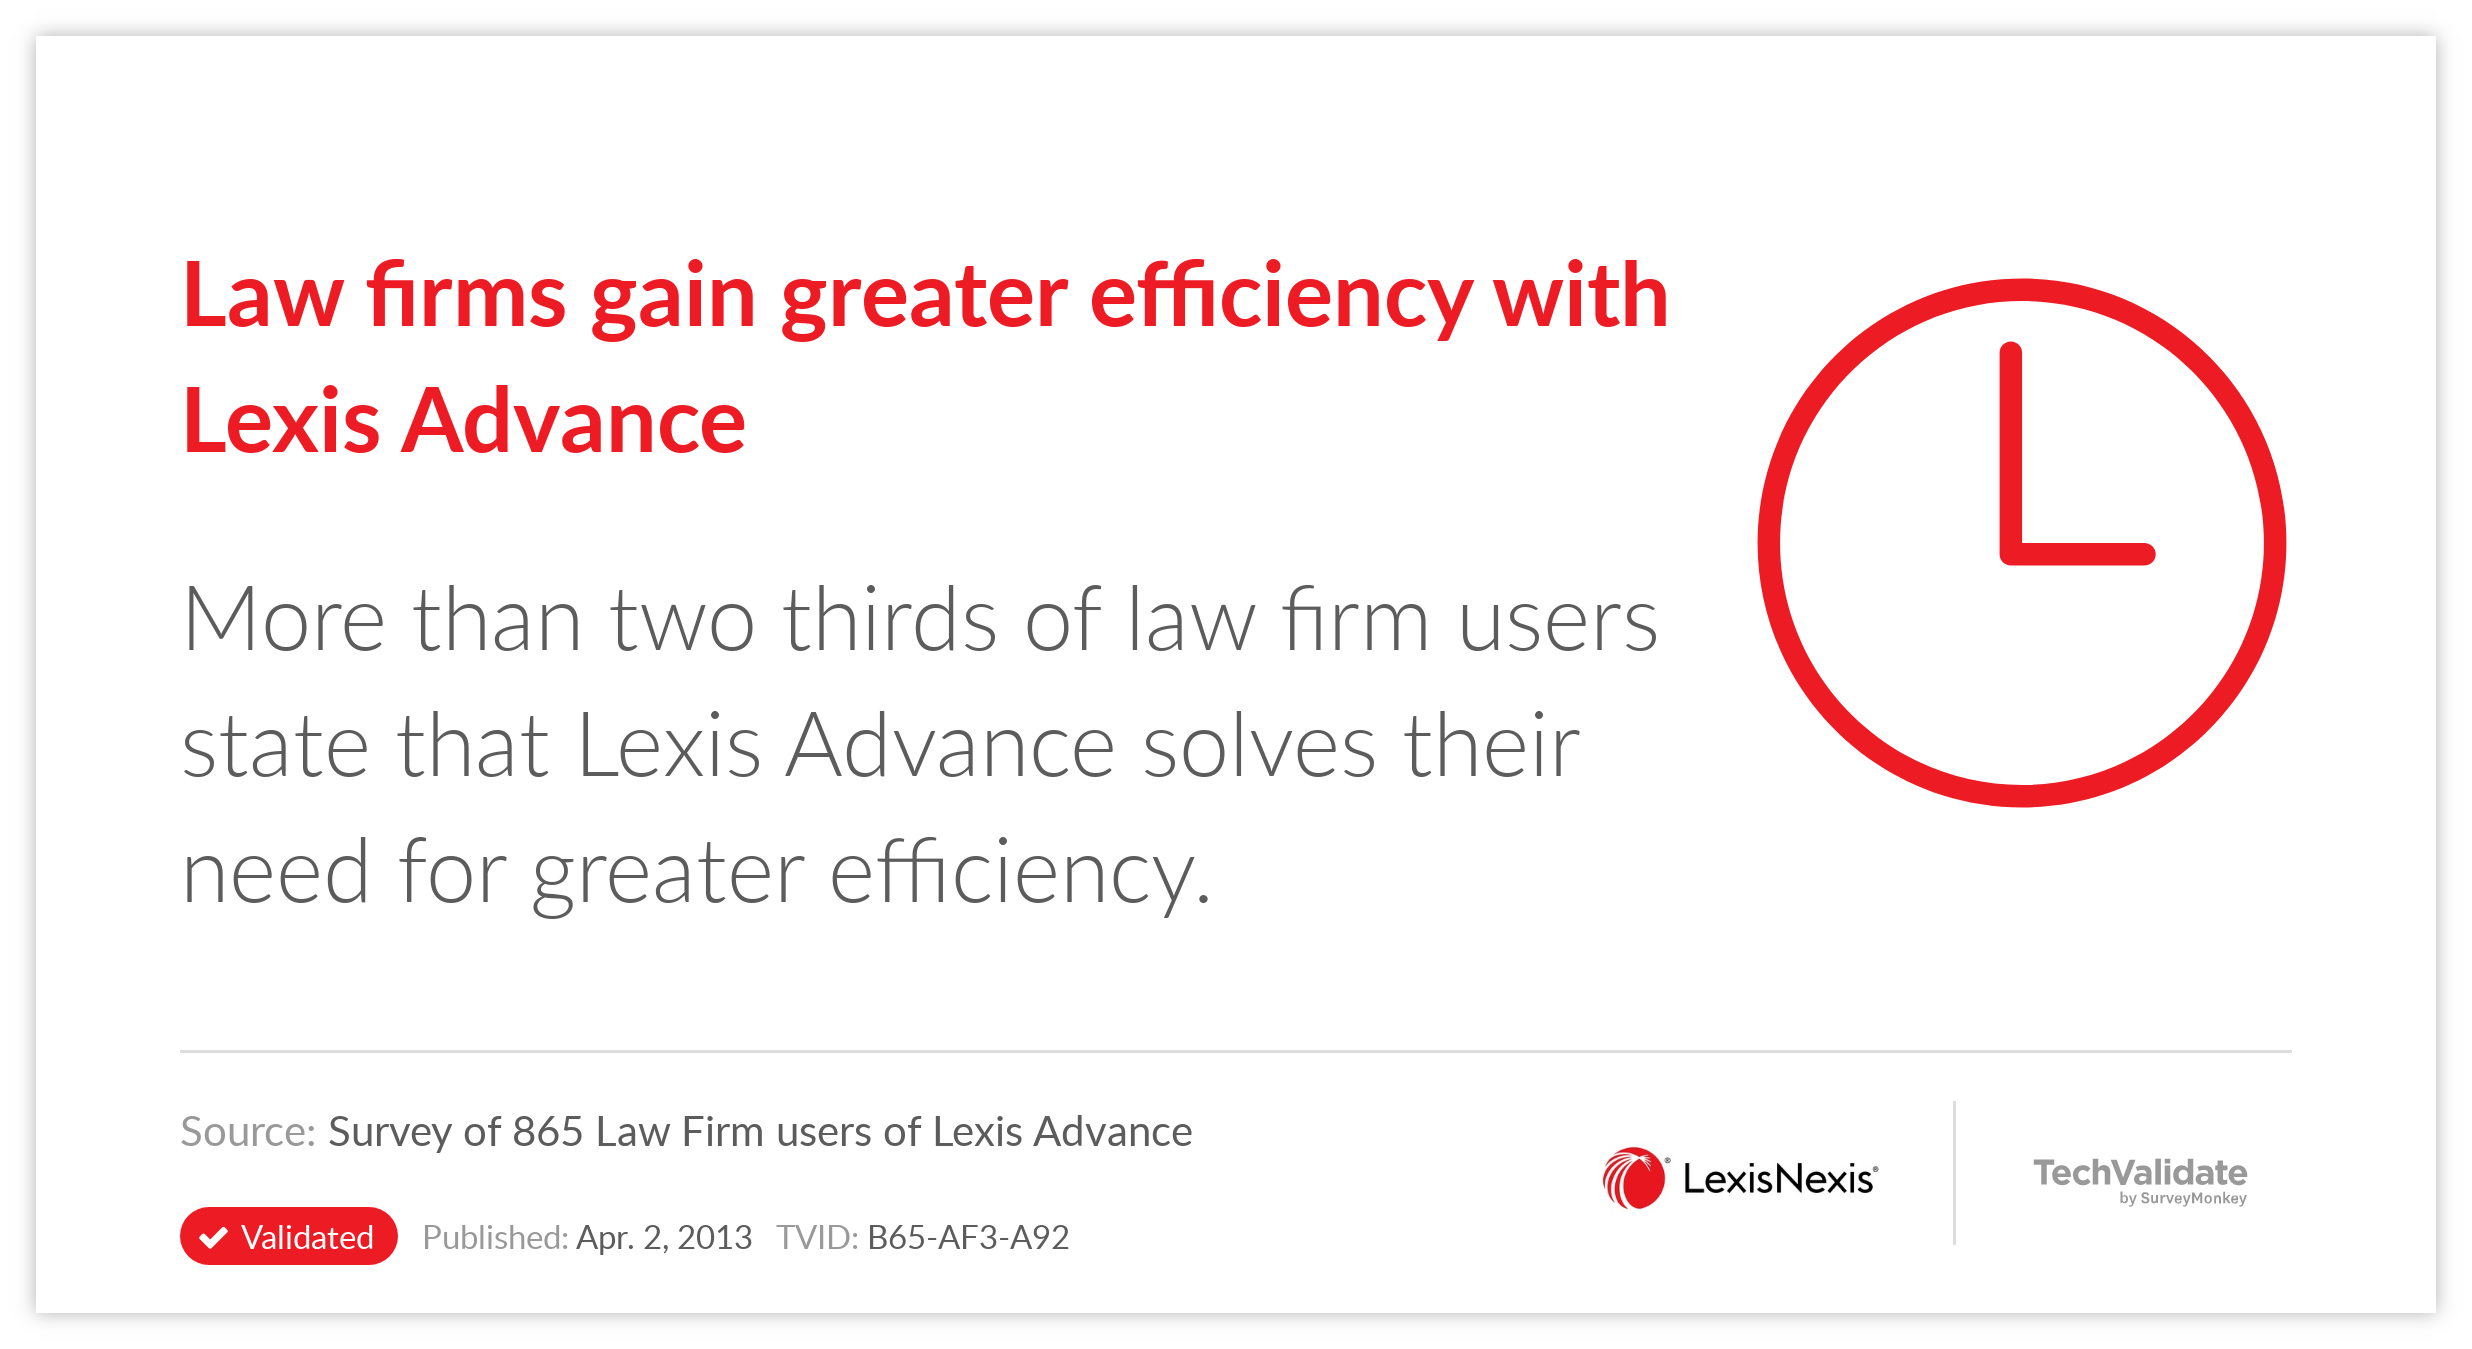 Law firms gain greater efficiency with Lexis Advance